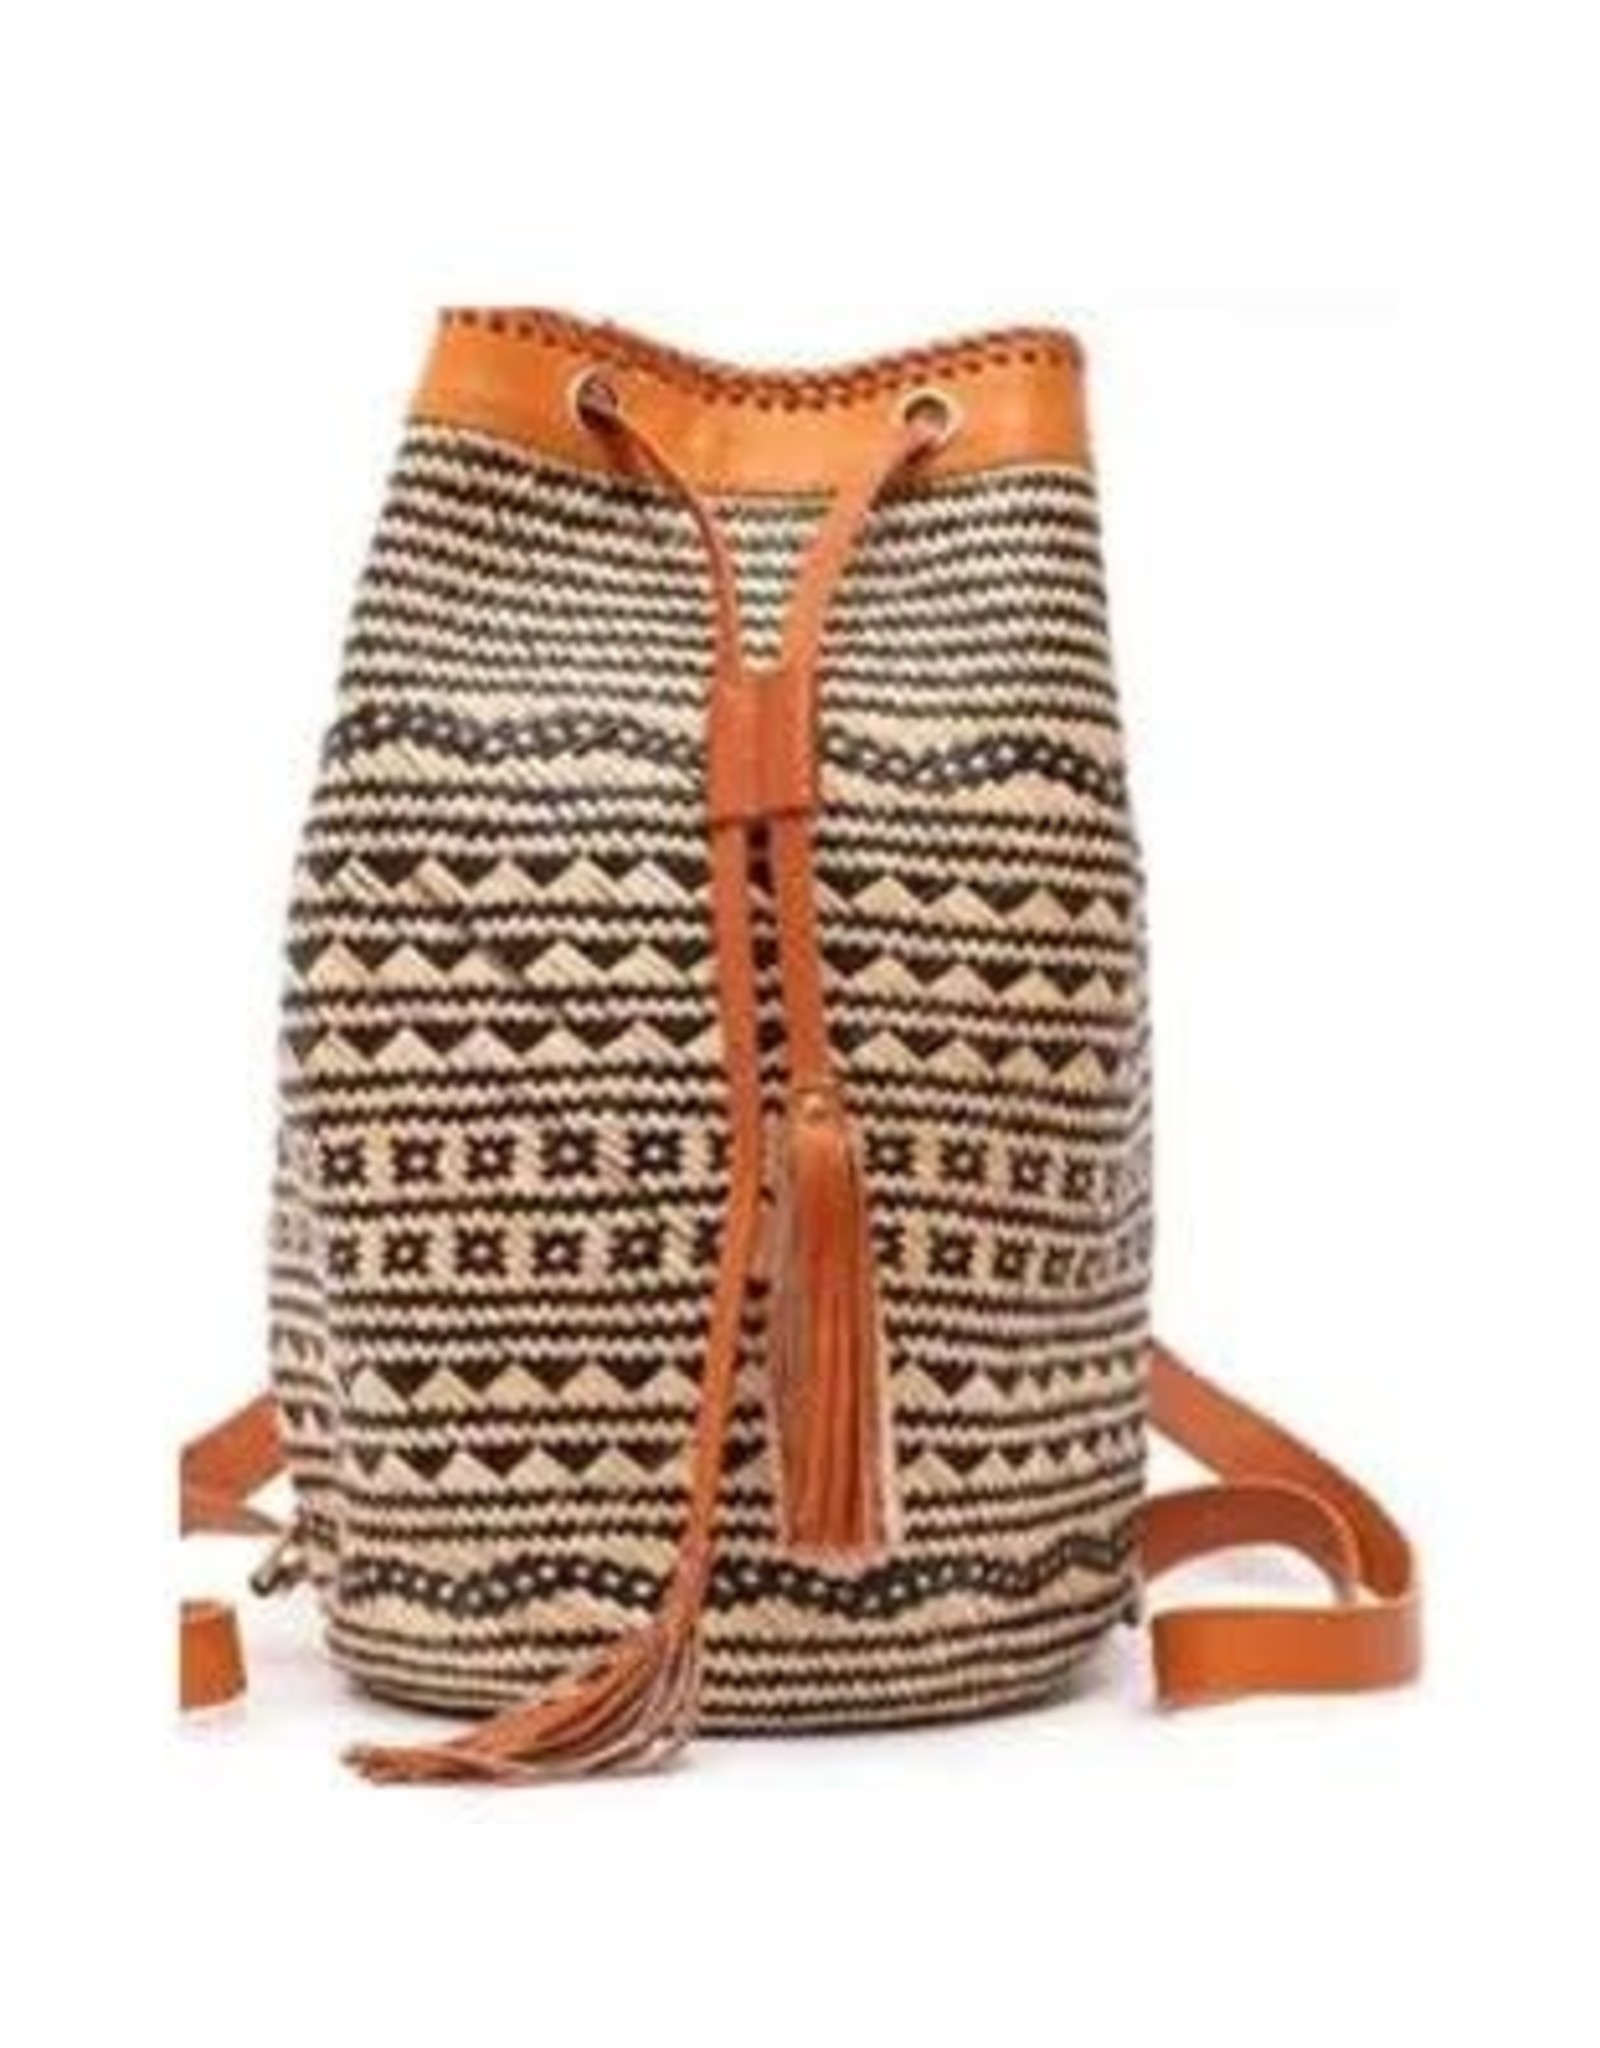 Trade roots Rattan Sling Back Pack Tribal Patten - Light Leather Large